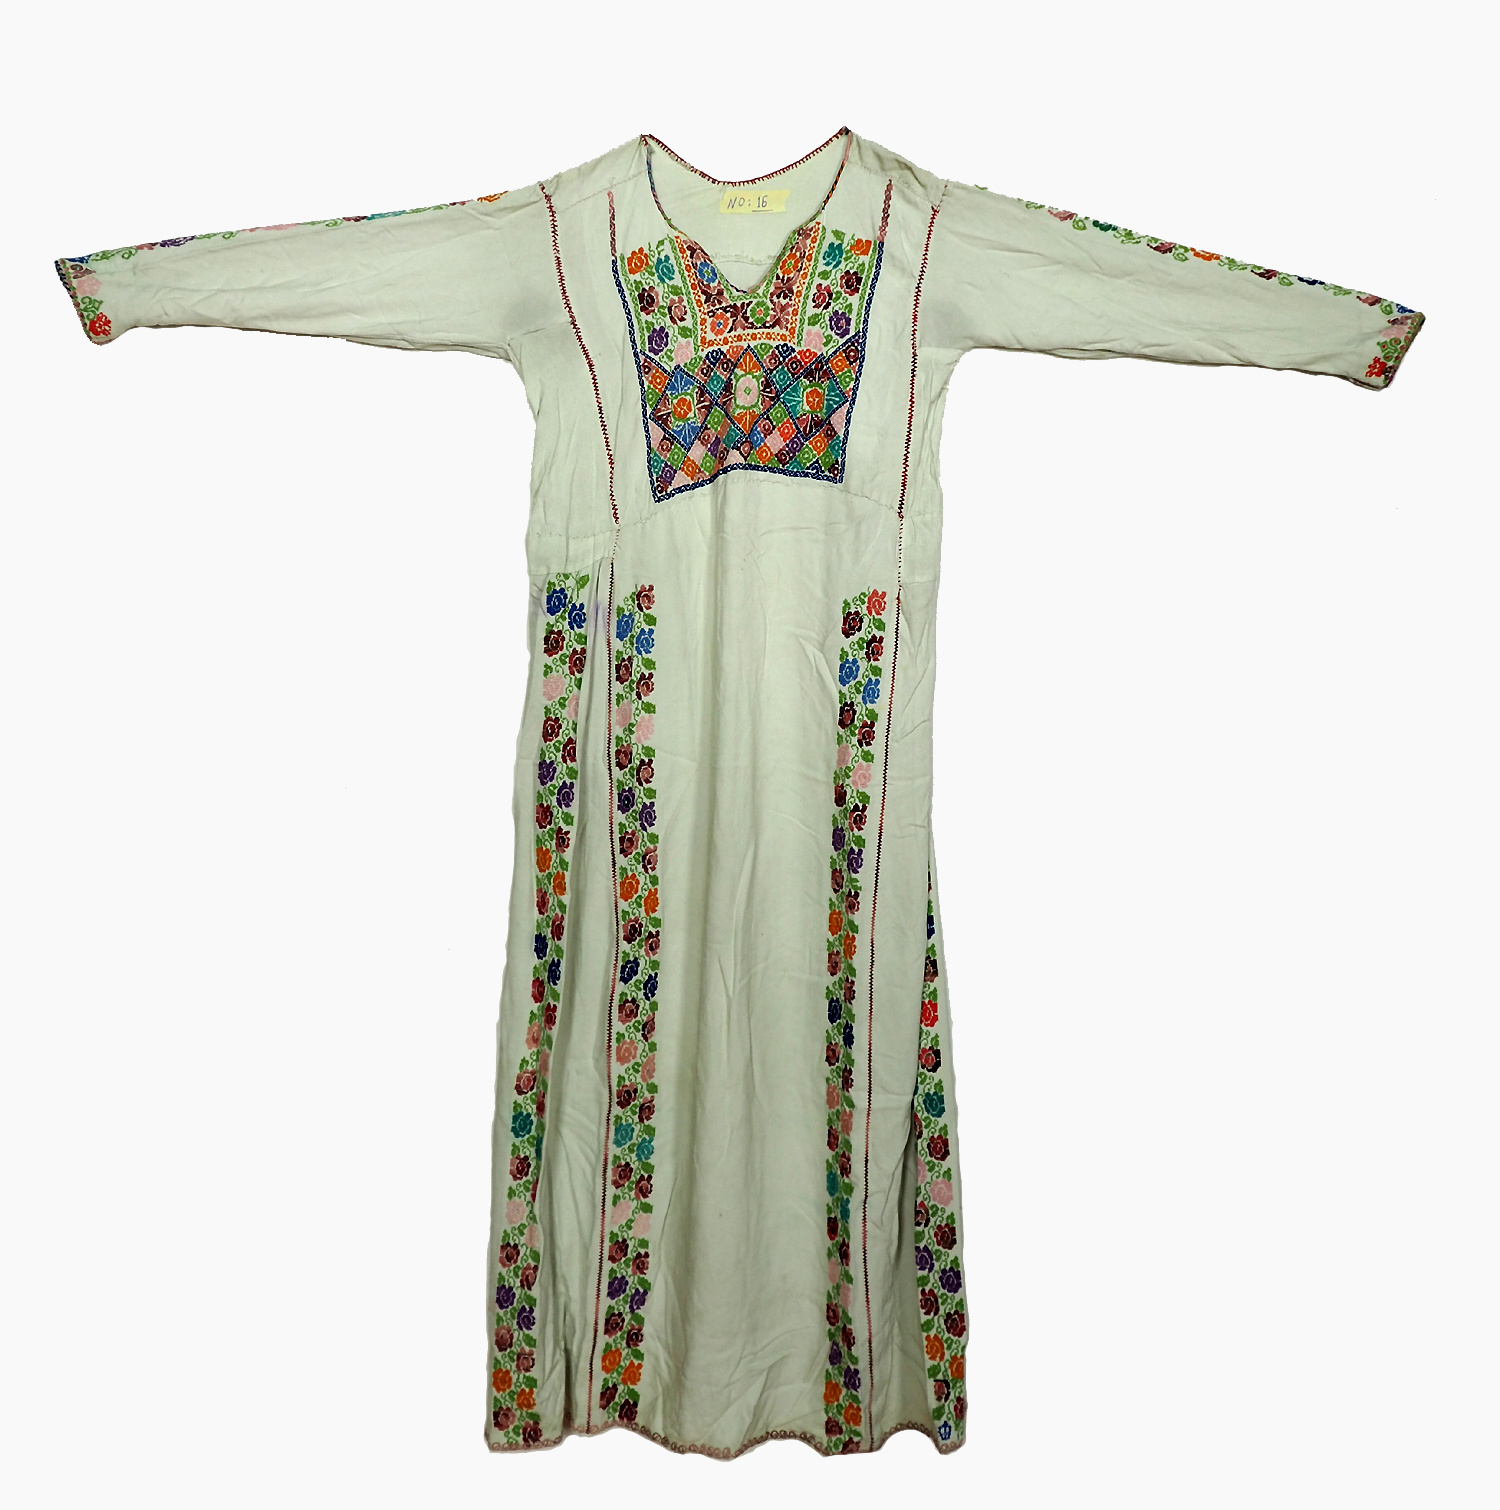 Palestinian girls embroidered ethnic dress No:16